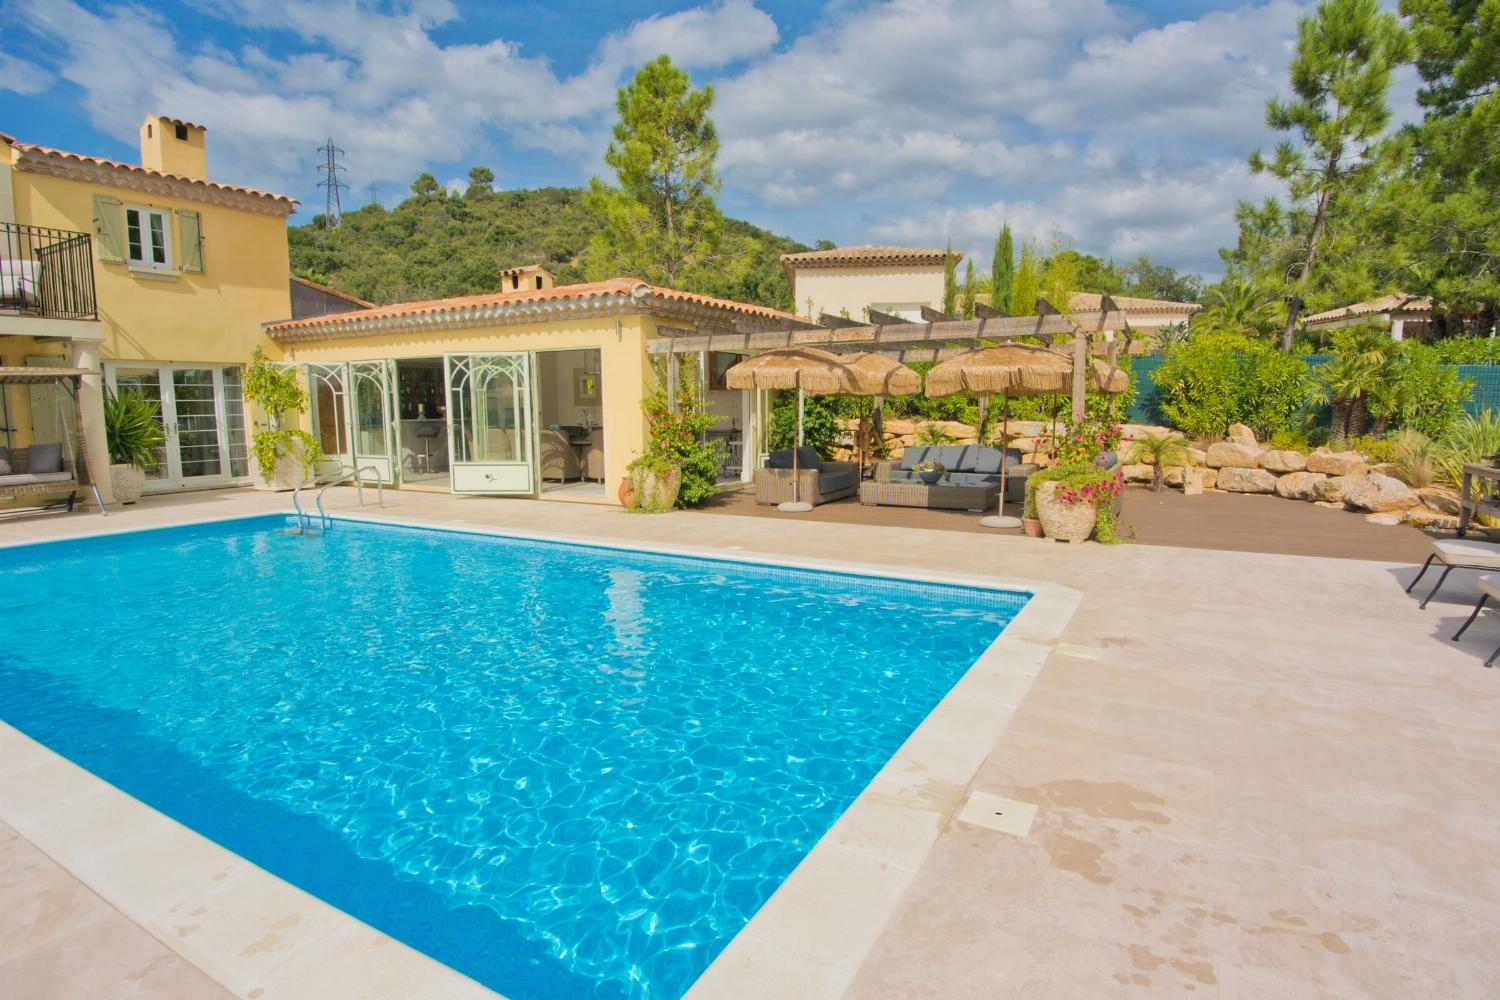 Holiday villa in Saint-Tropez with private heated pool